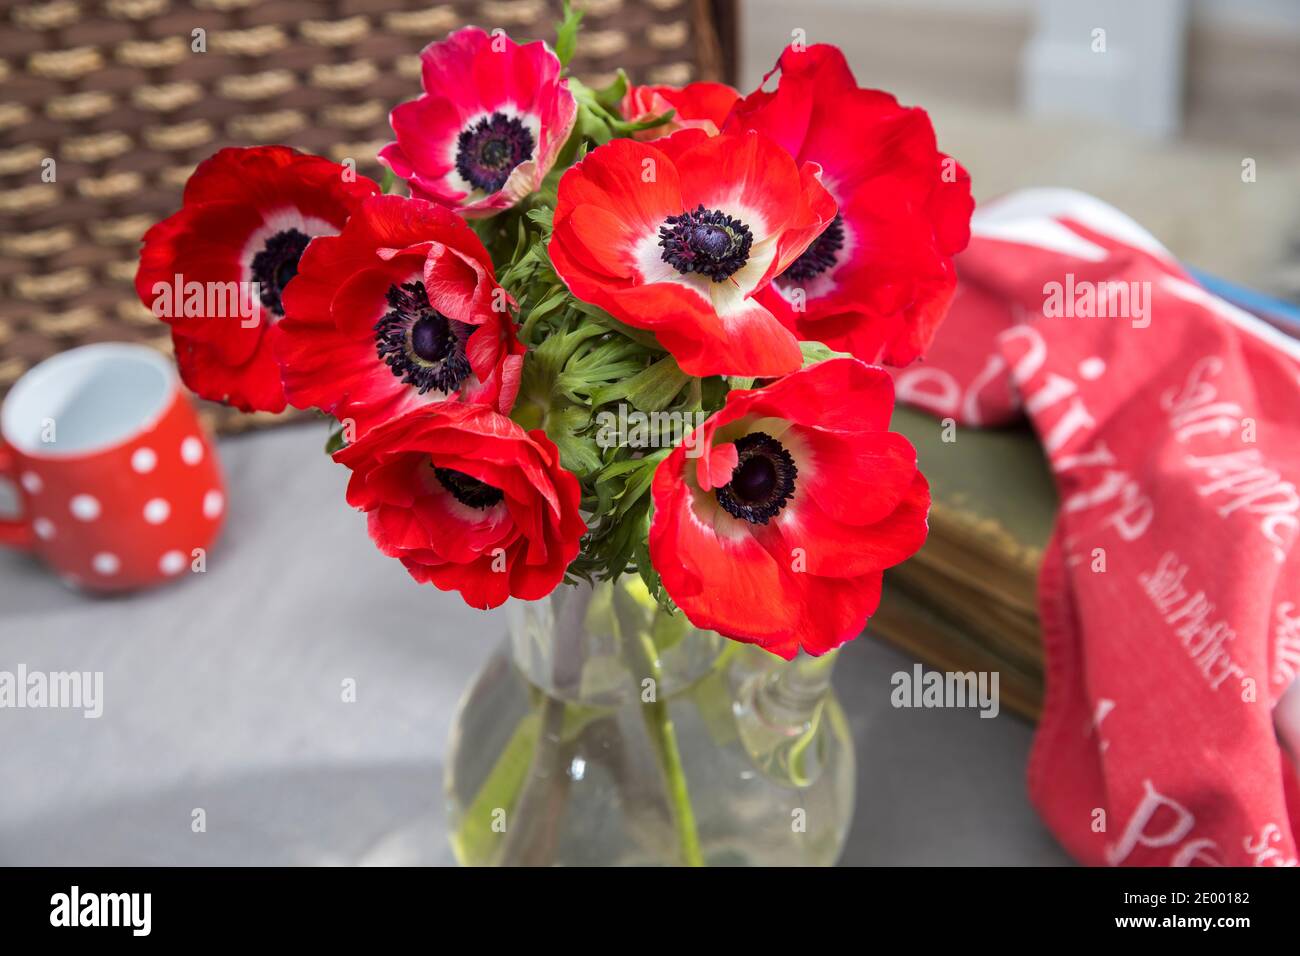 A bouquet of red anemones in a transparent glass vase on a table with a gray tablecloth. White polka dot red cup with tea and towel. Morning Stock Photo